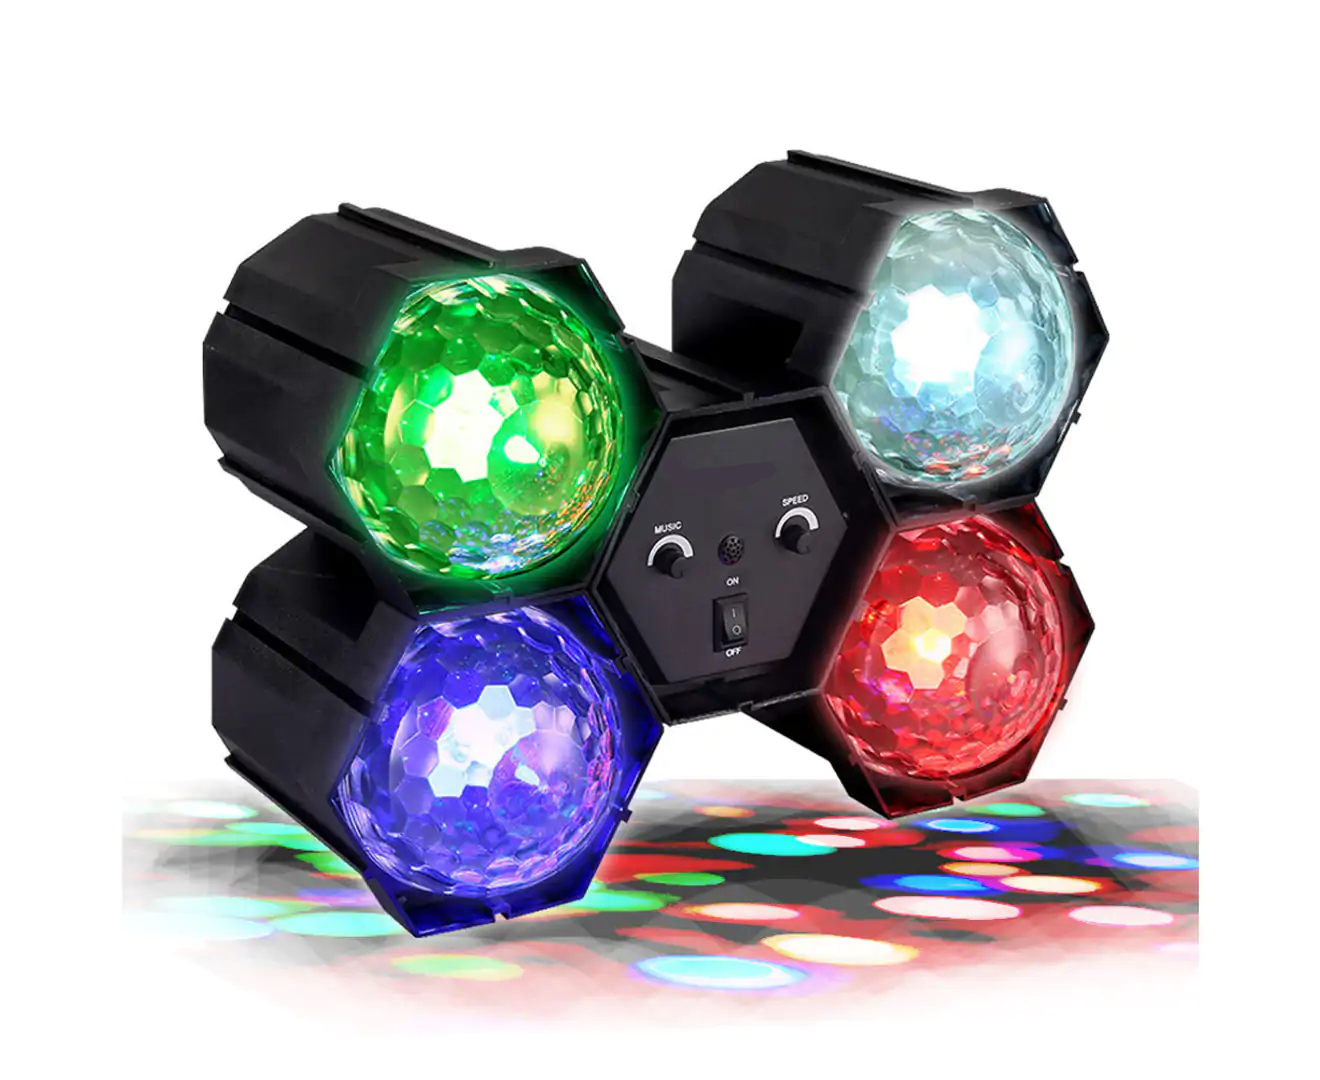 4 WAY DISCO LIGHT PARTY TIME FOR INDOOR USE